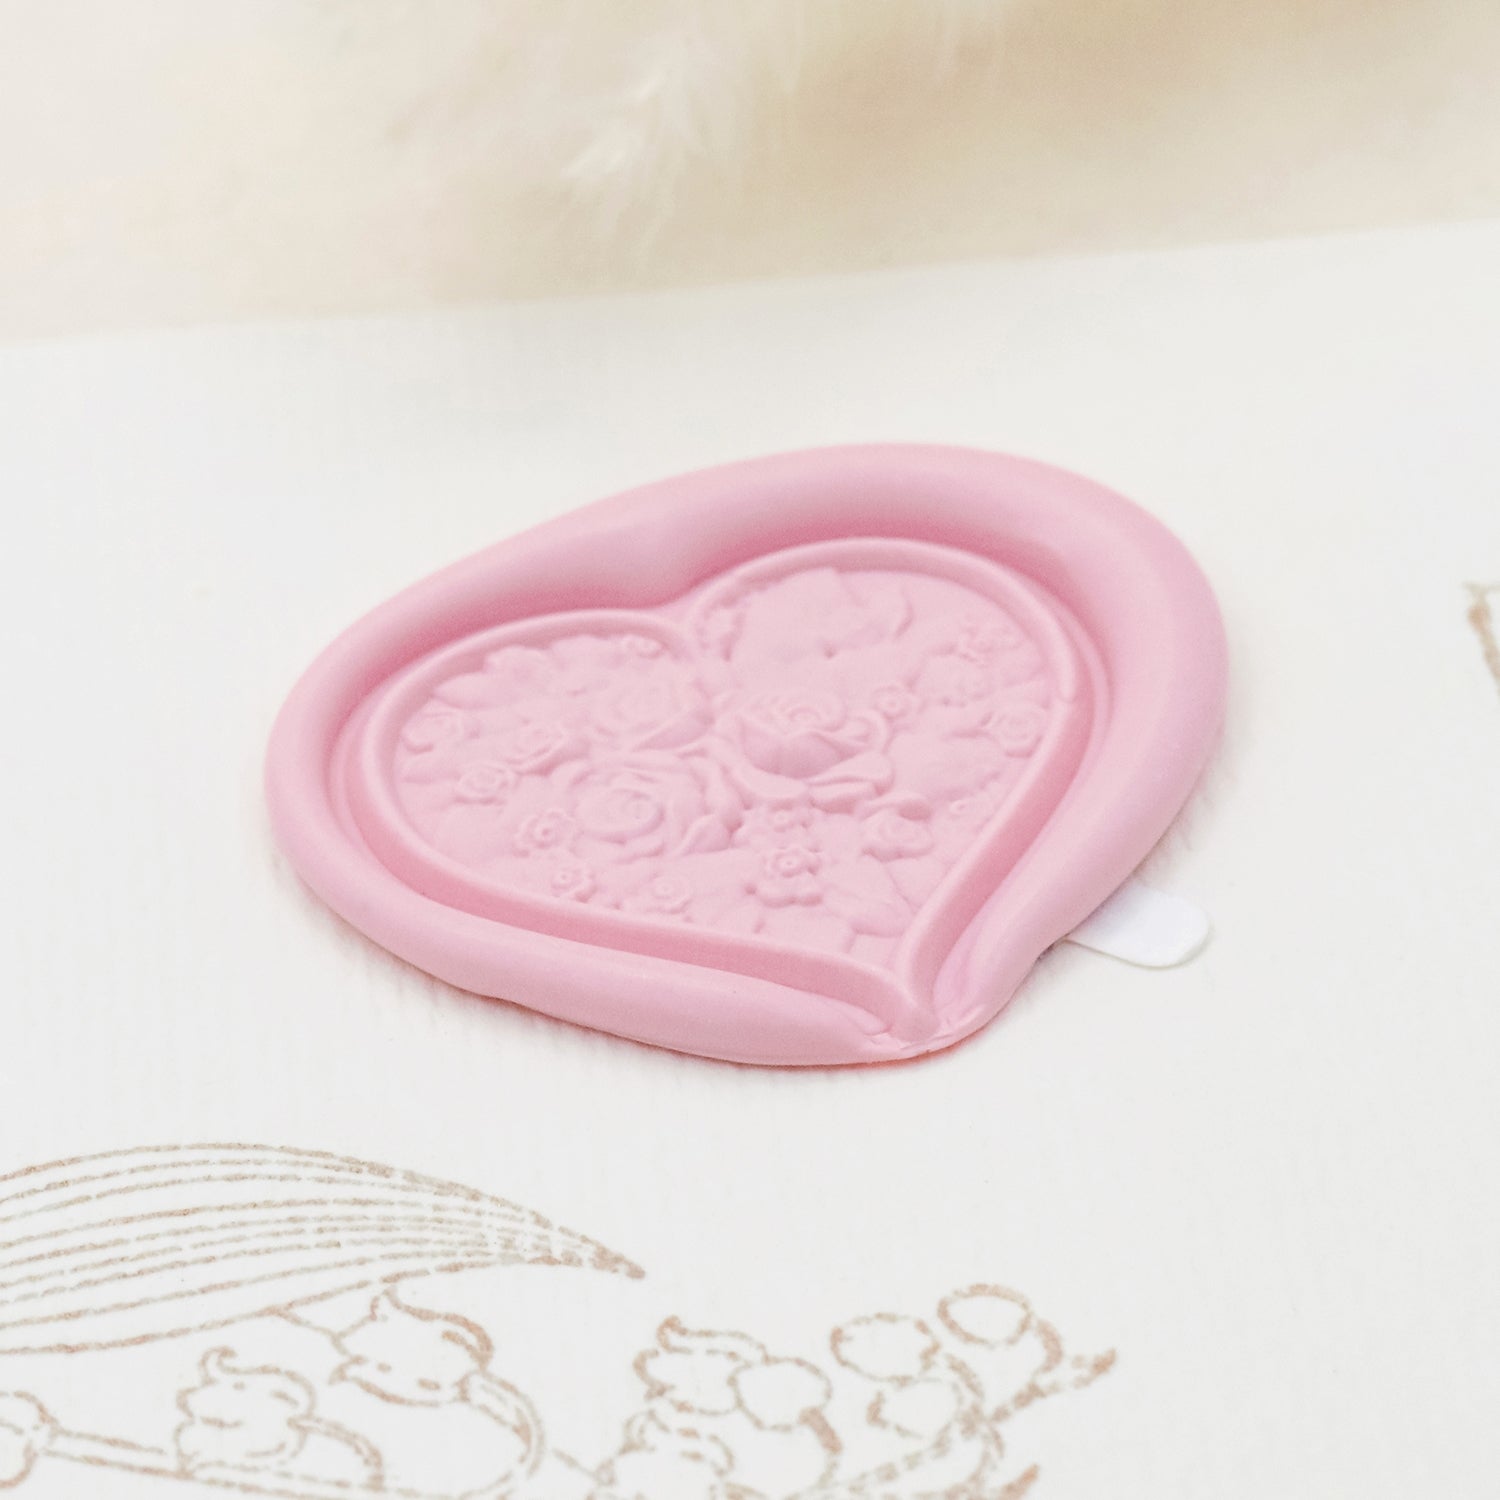 Custom Wax Seal Stamp - Heart Shaped 3D Relief Wax Seal Stamp